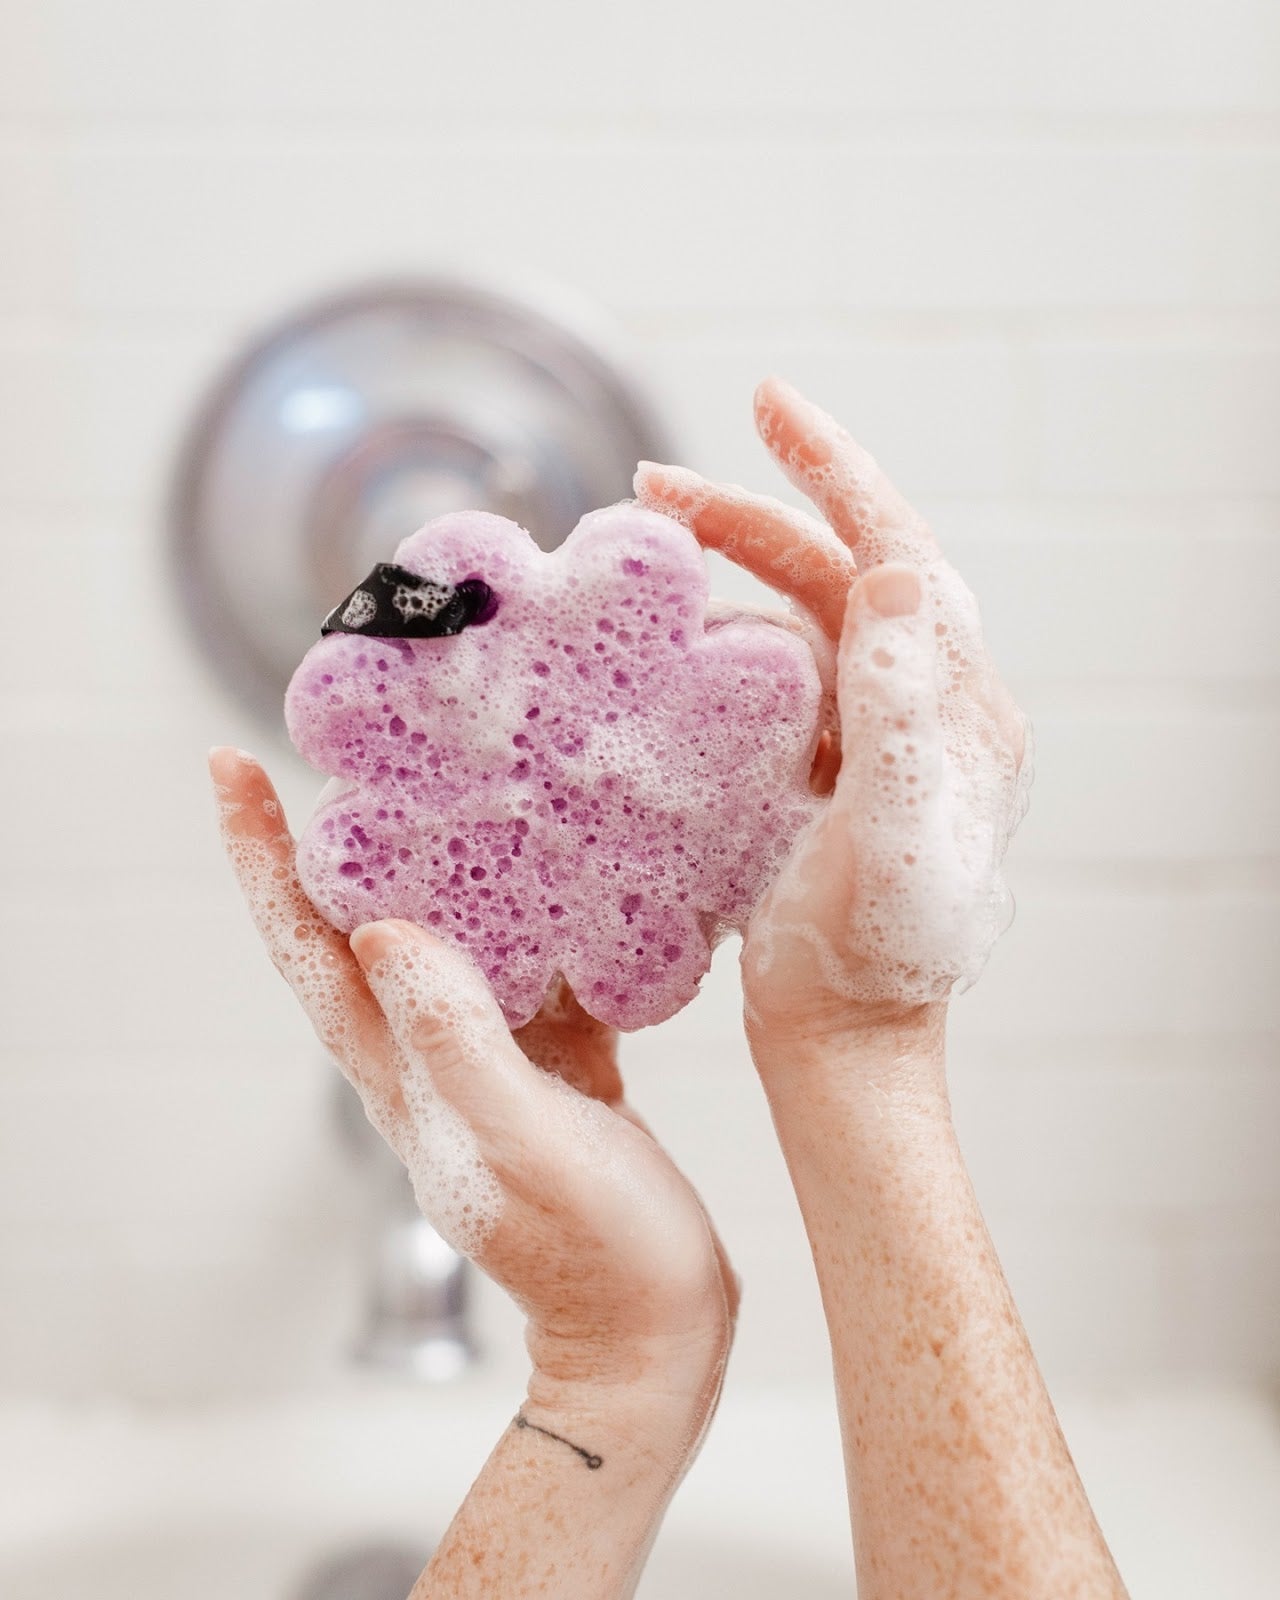 Where To Find A Body Washing Sponge